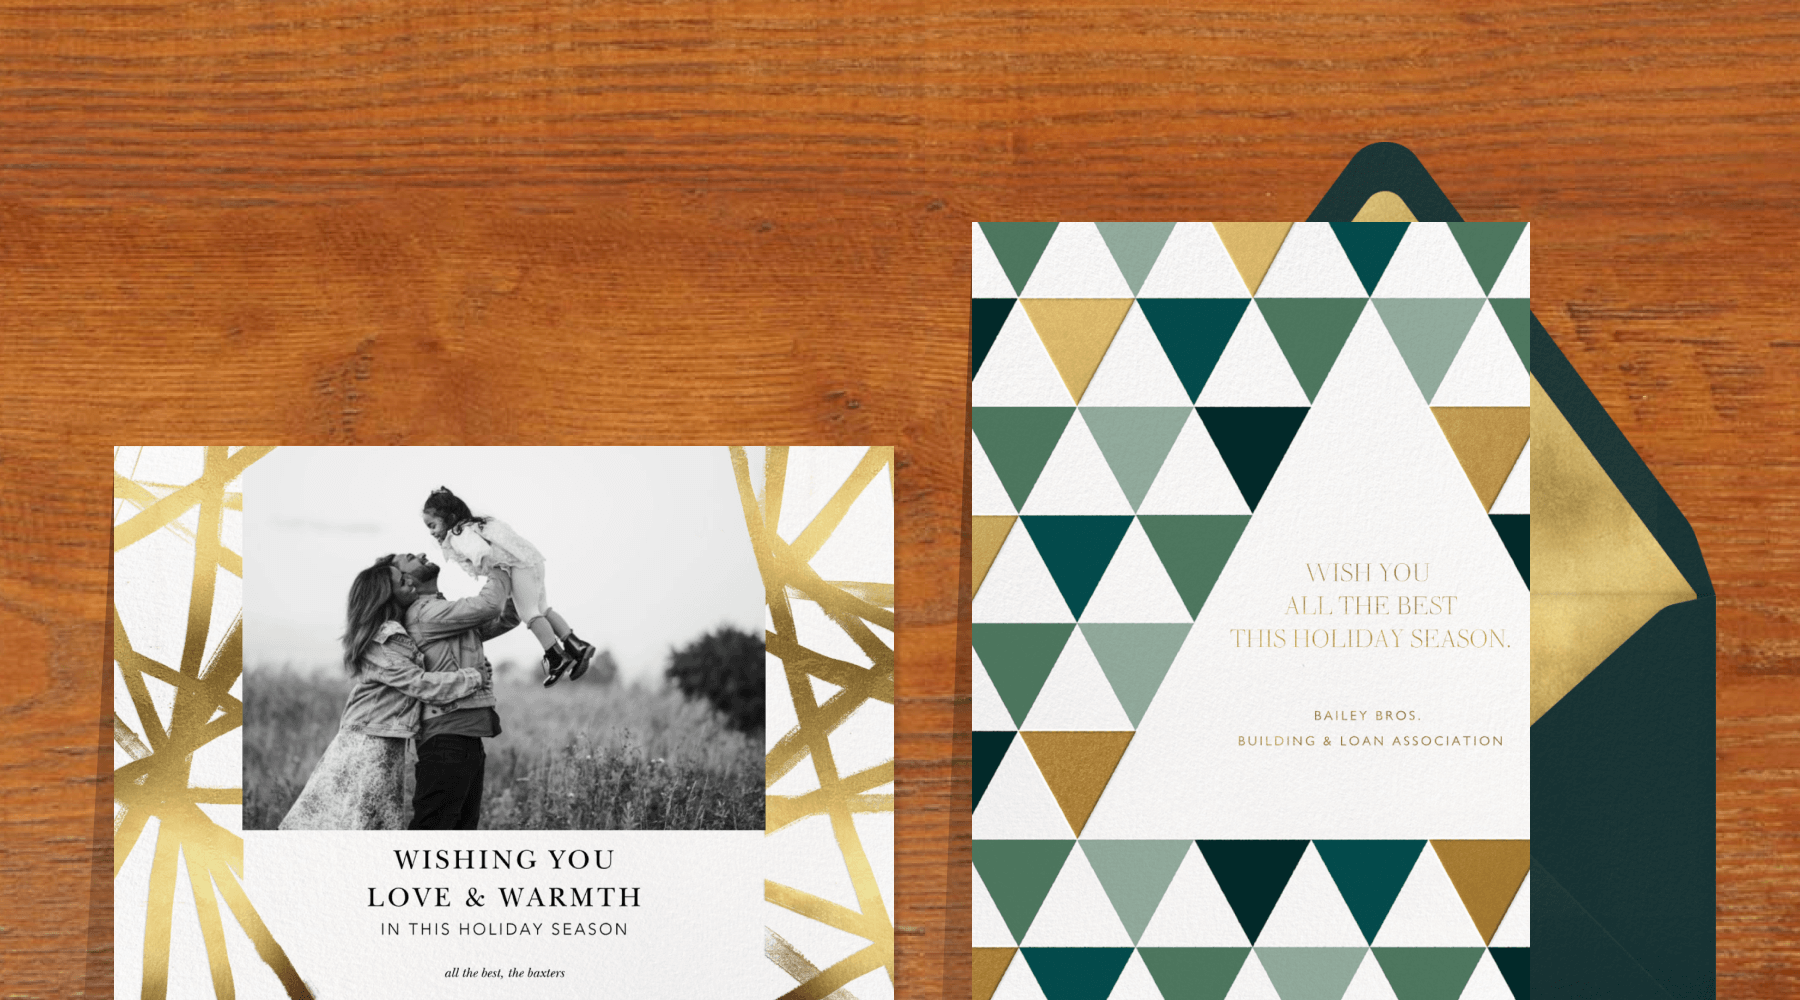 A card with a black and white family photo flanked by abstract gold lines; a card has repeating triangles in shades of green and gold forming a pattern.